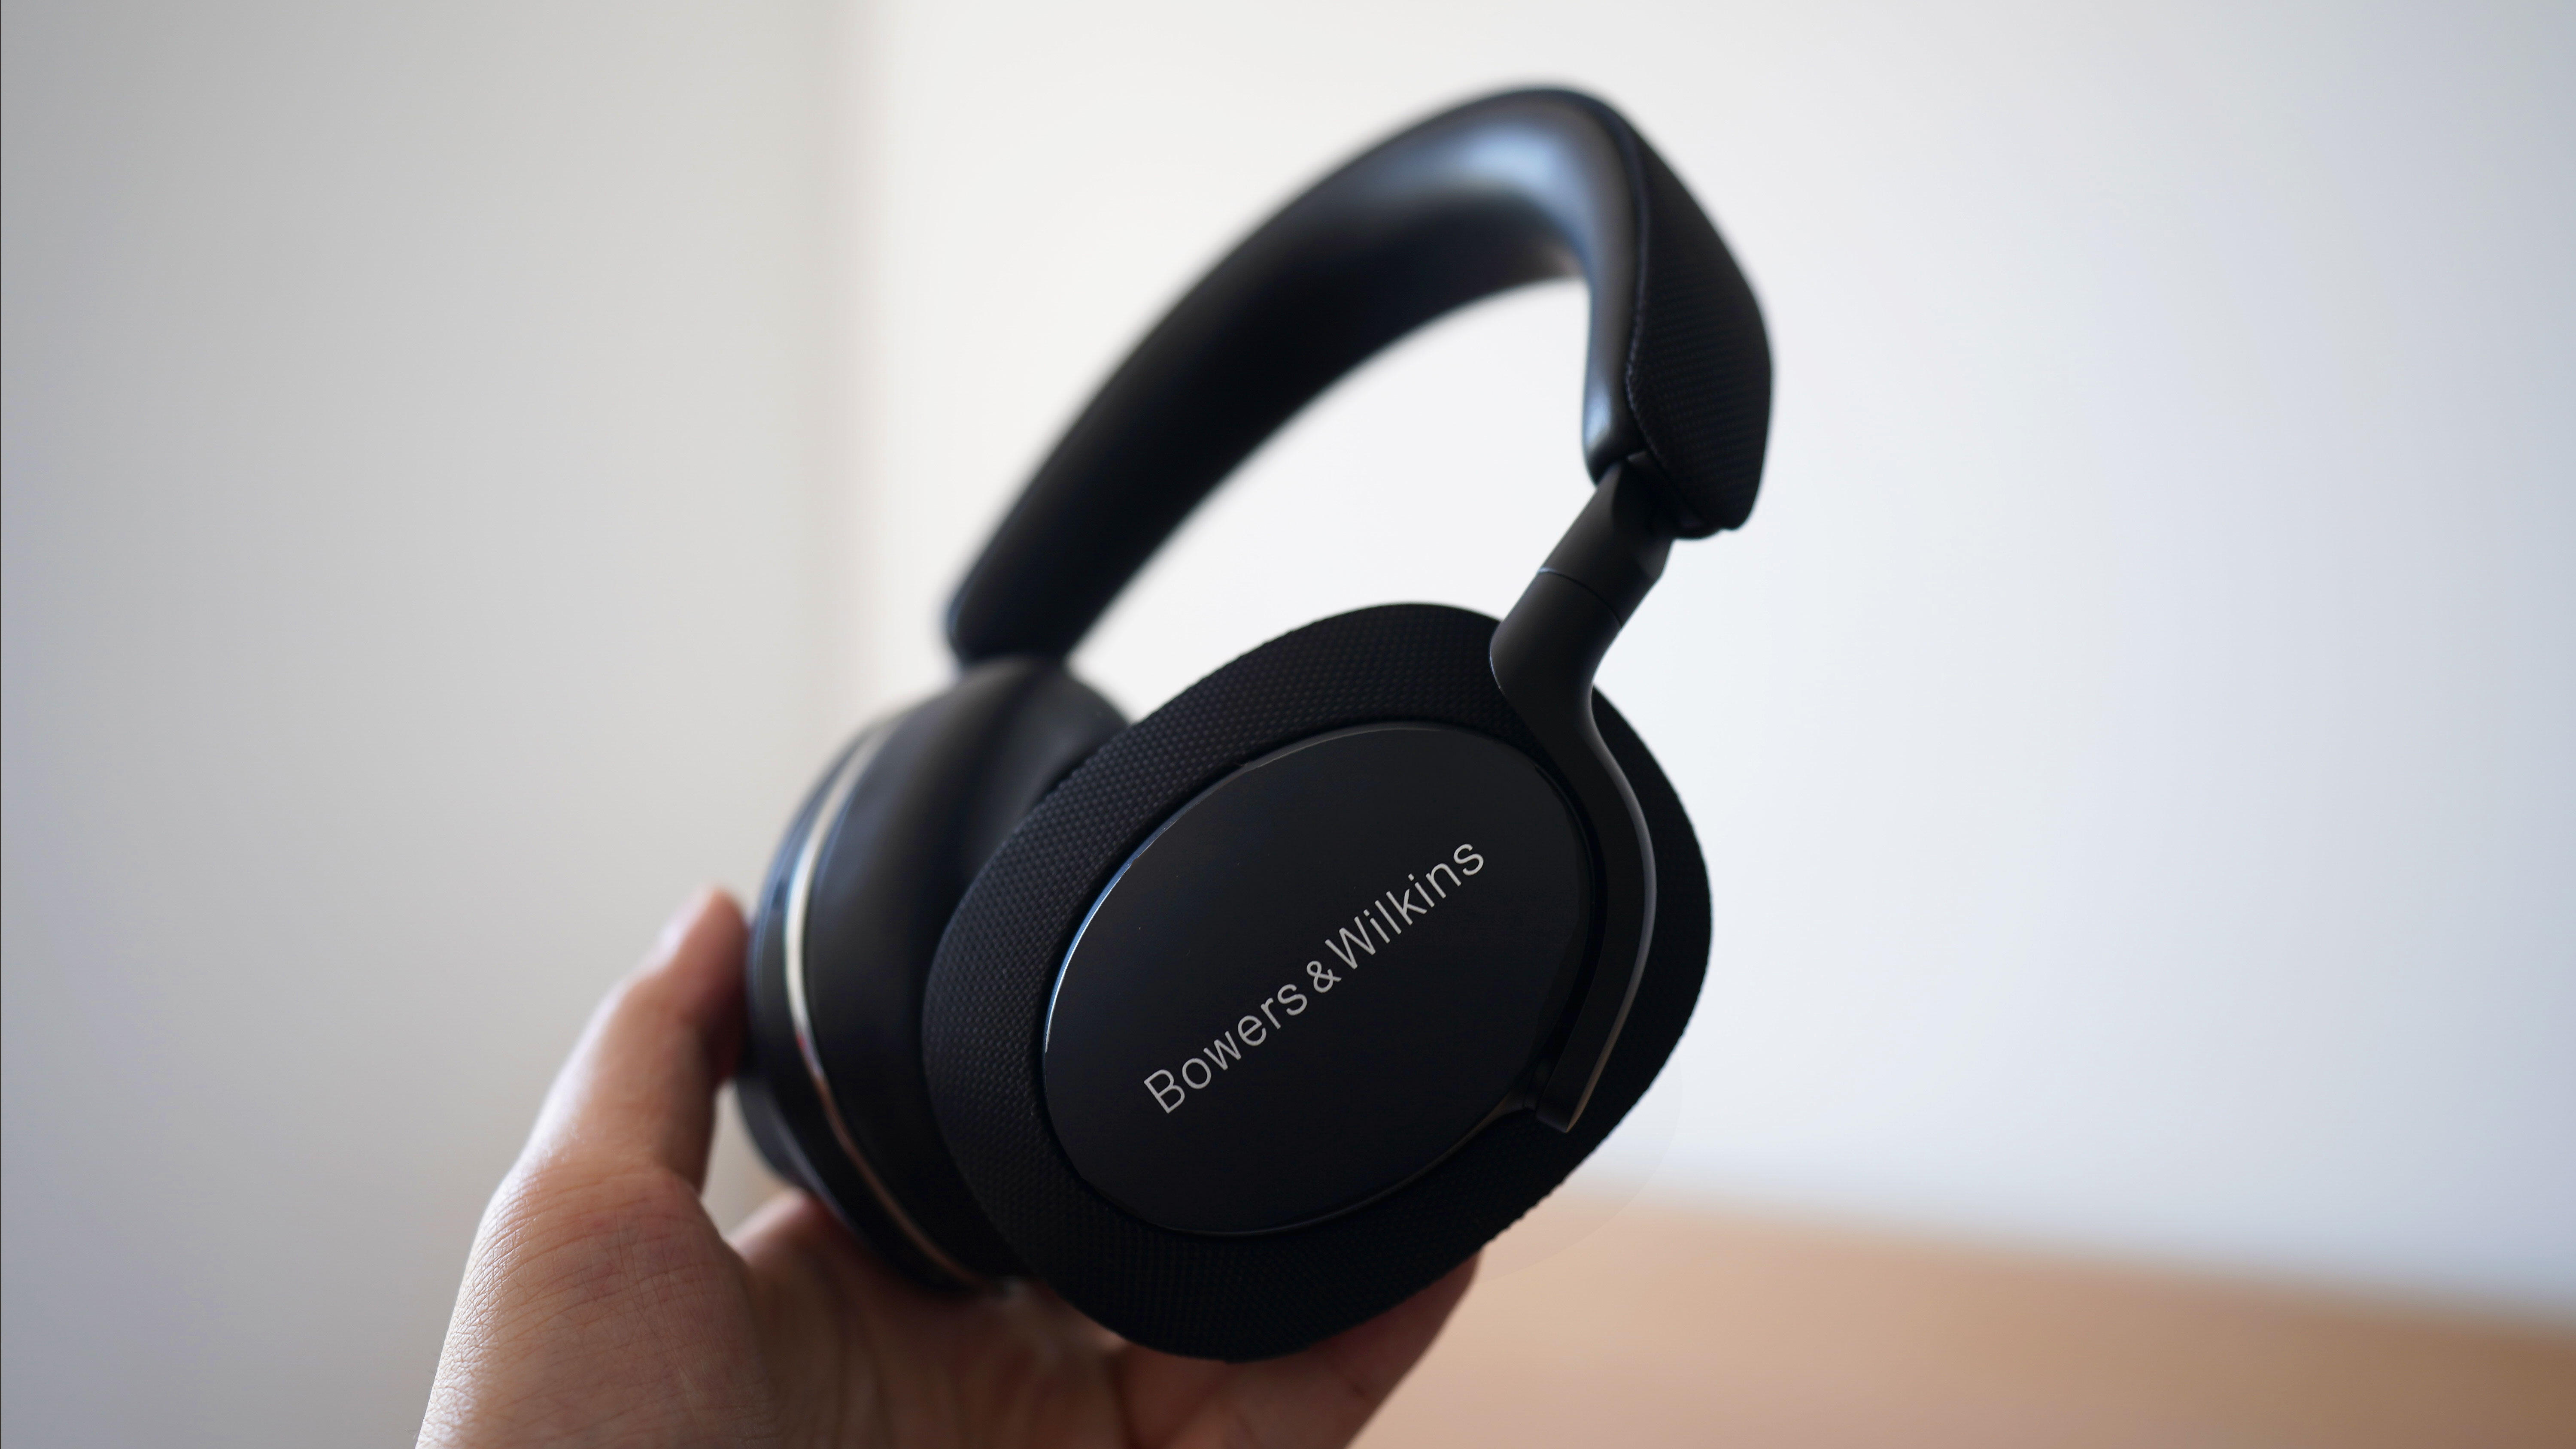 Bowers & Wilkins Px7 S2 review: Premium headphones that rival Sony and Bose